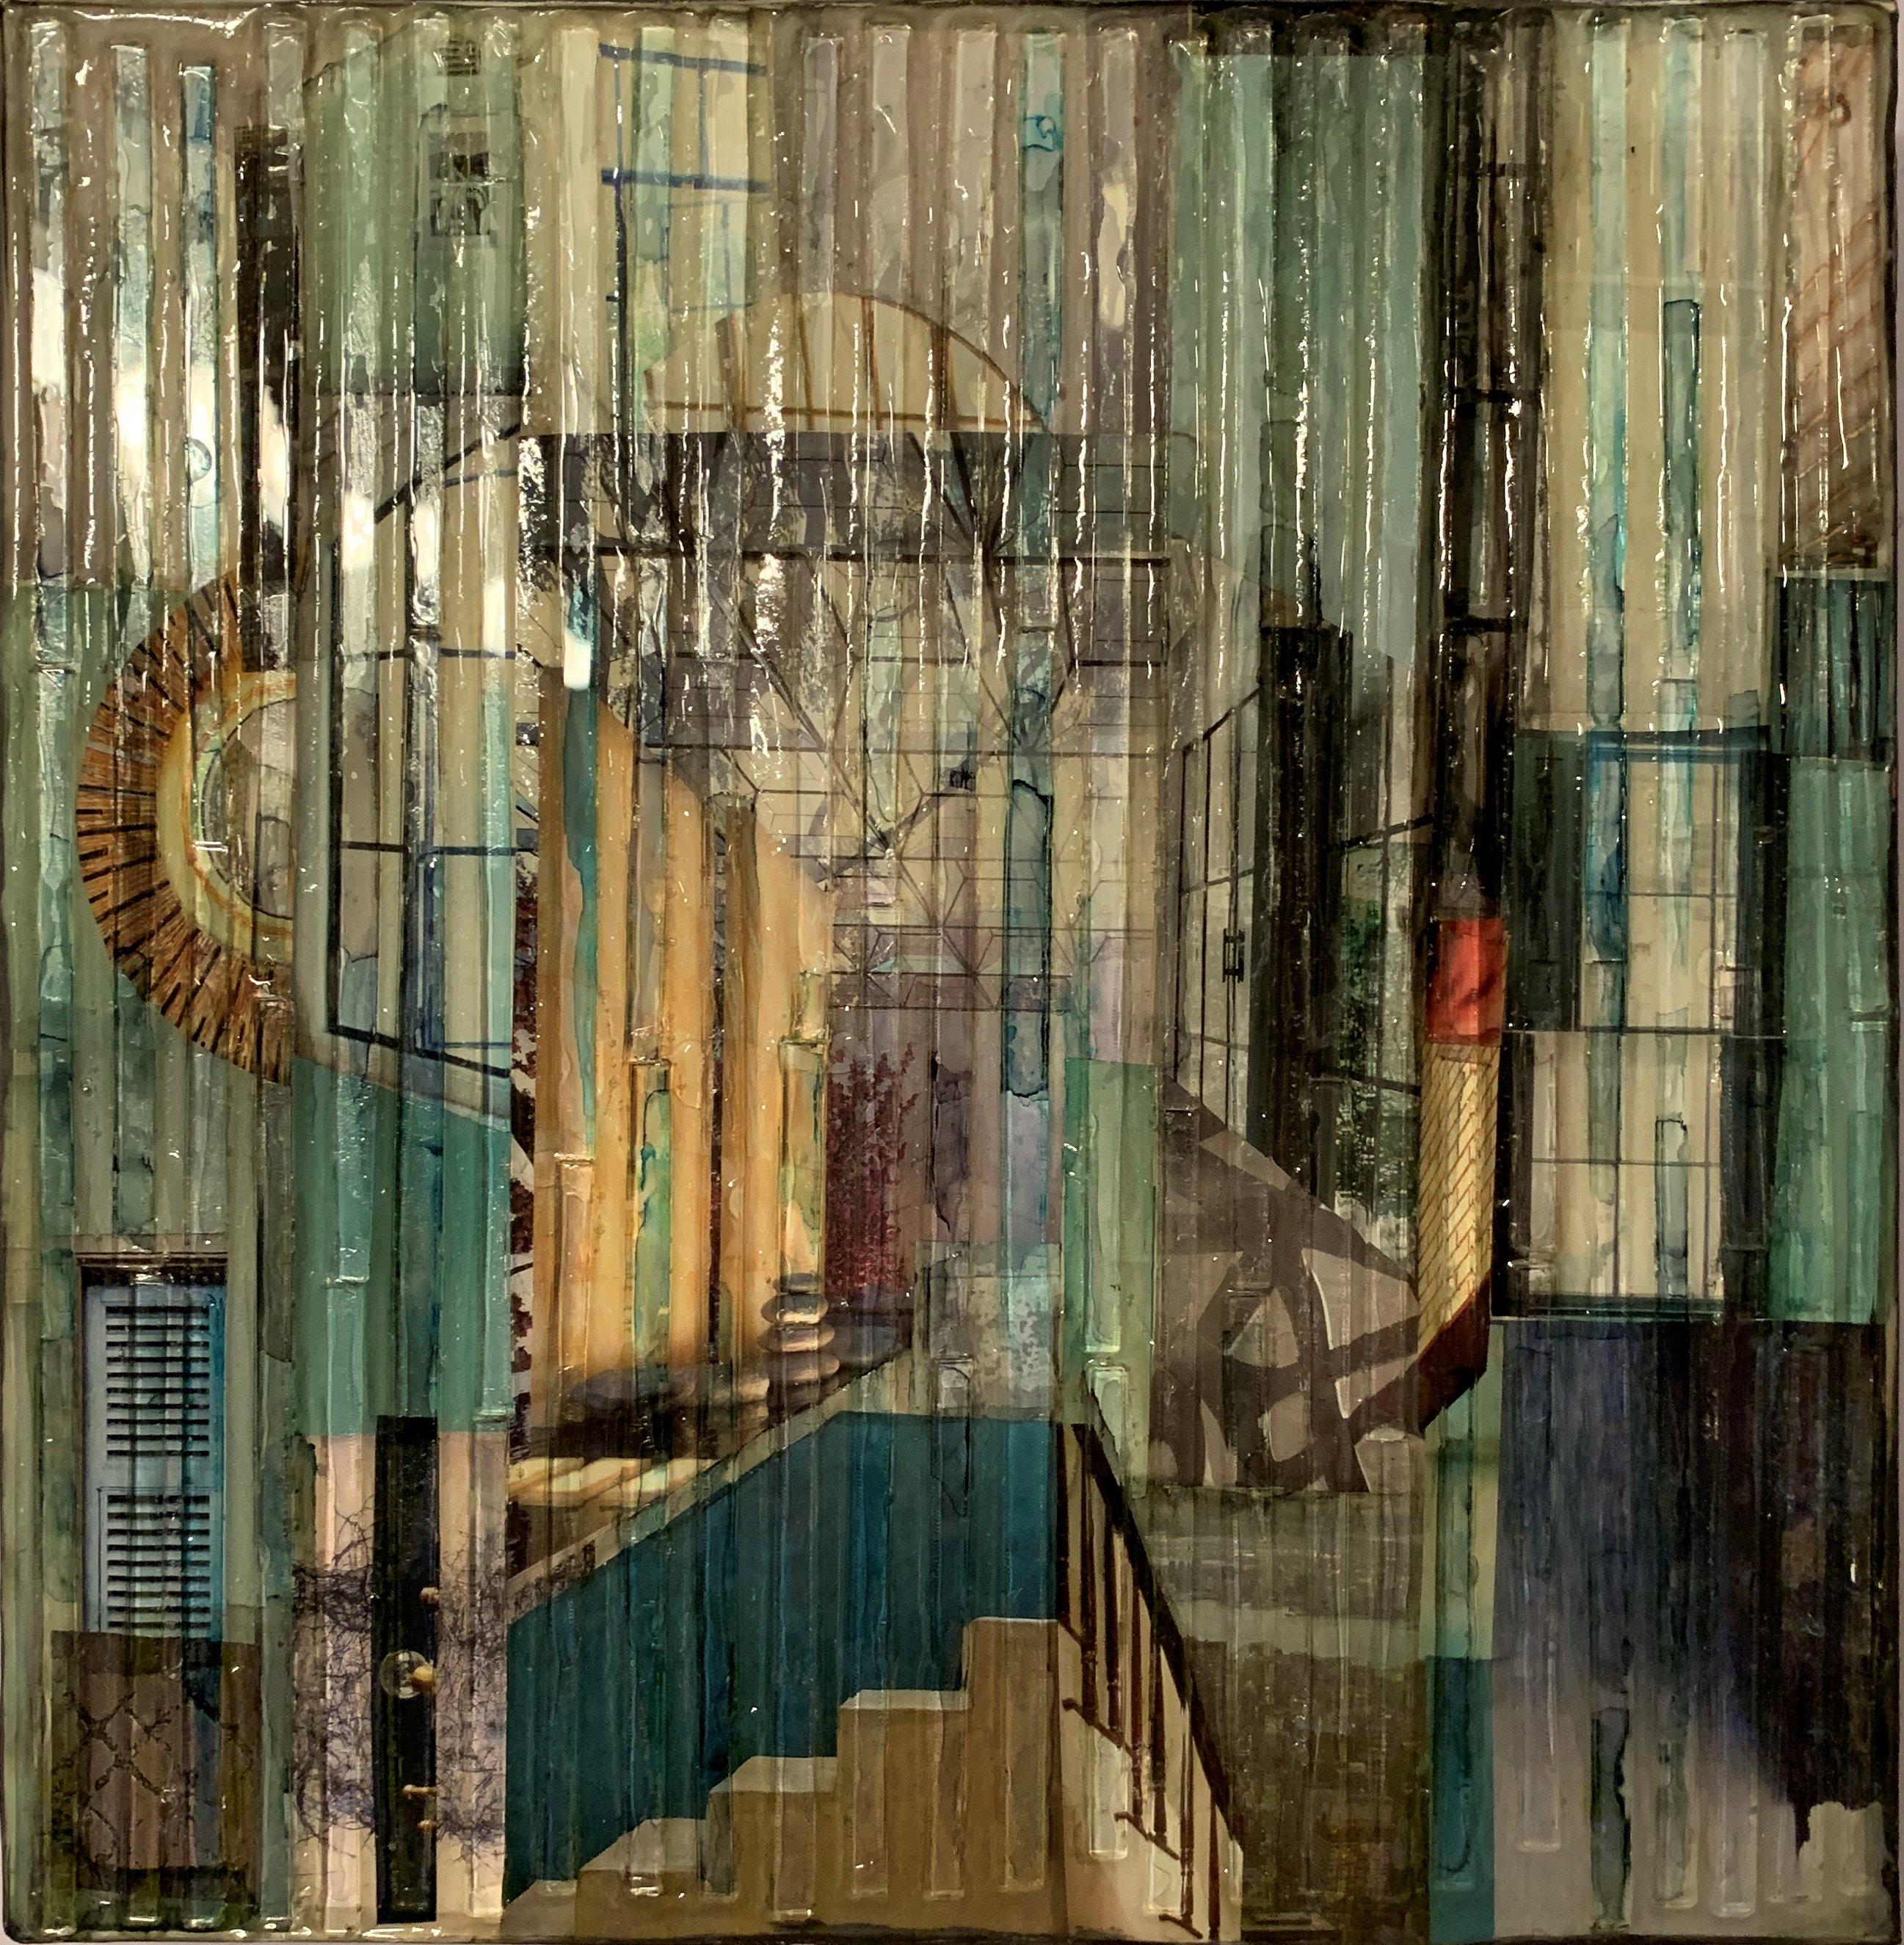 Madonna Phillips (b. 1950)
Structure II, circa 2017
Glass and mixed media on wood panel
12 x 12 inches
Signed and titled on the reverse

Provenance:
Wit Gallery, Lenox, Massachusetts
Private Collection, New York


Primarily a self-taught mixed media